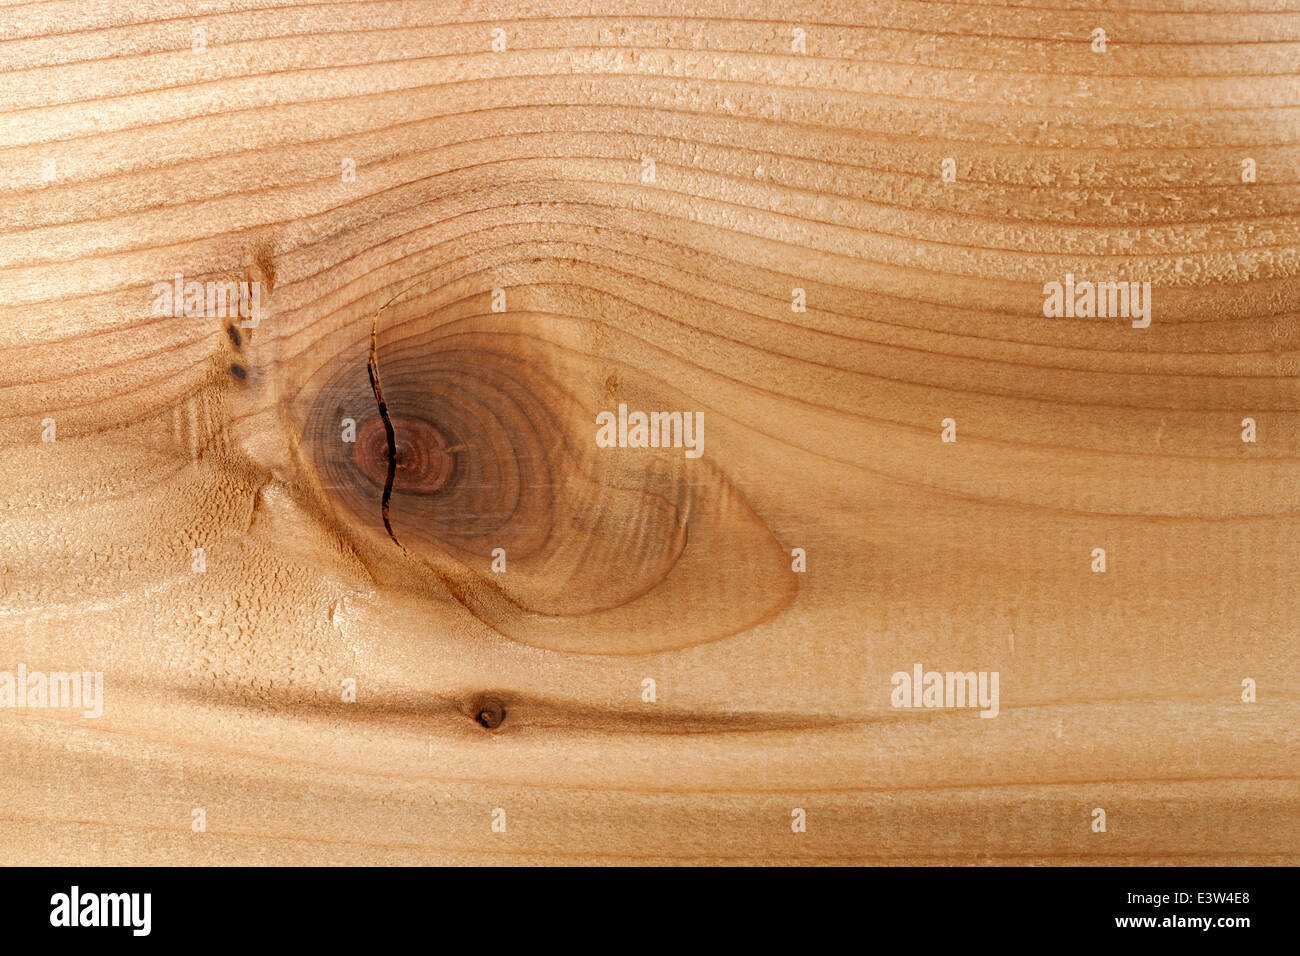 Closeup of red cedar plank showing knot texture and natural woodgrain pattern as wood background Stock Photo